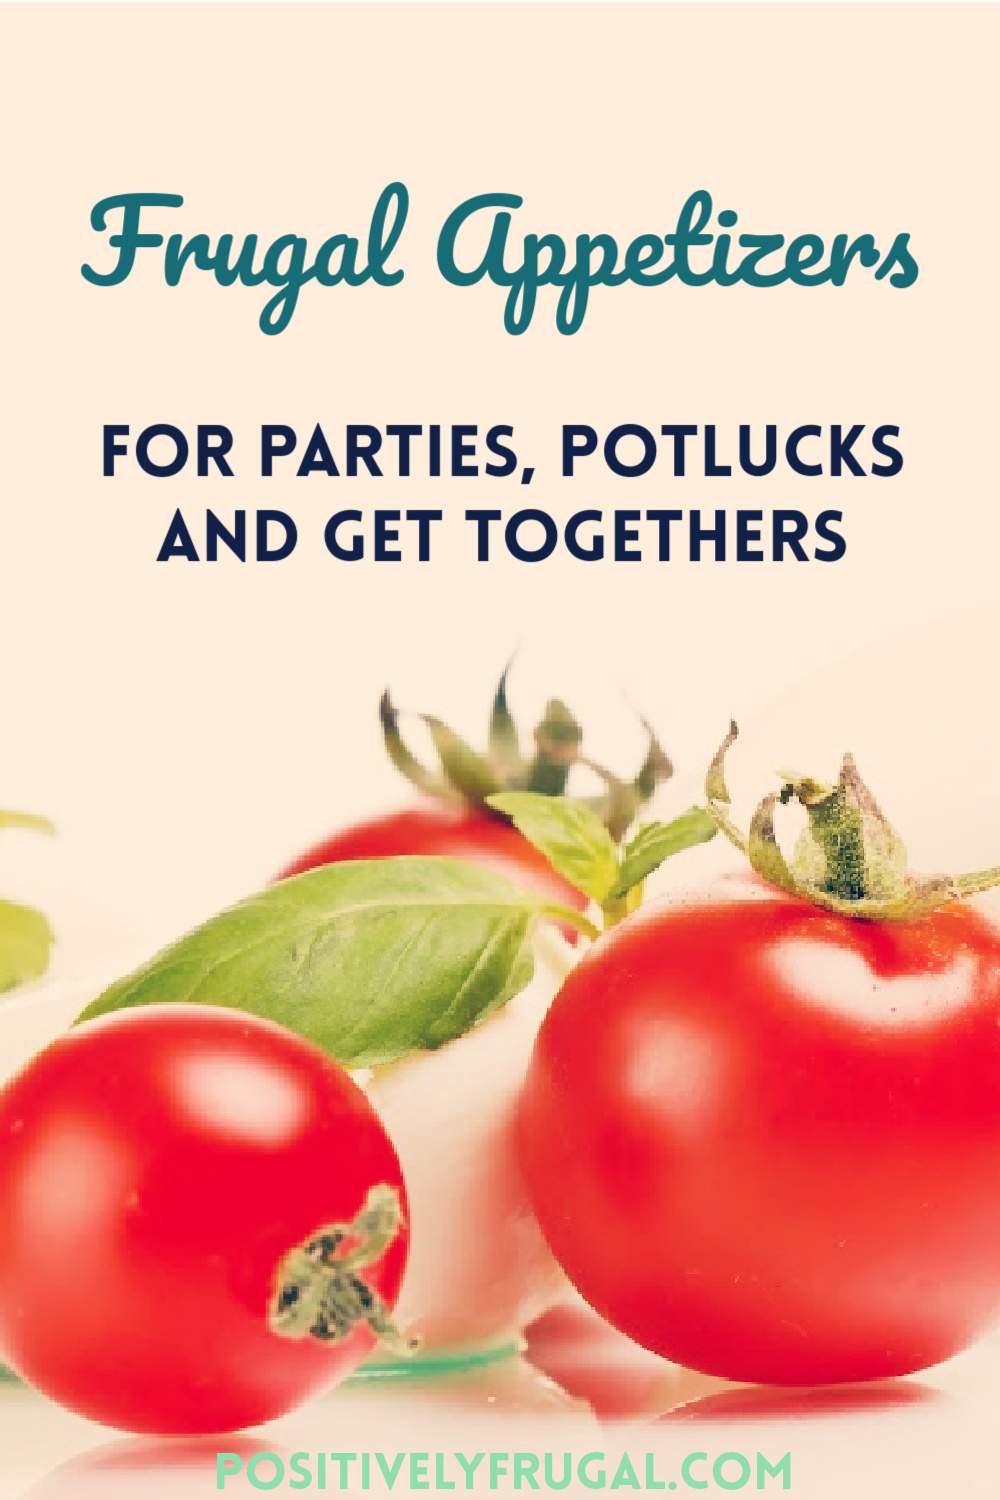 Frugal Appetizers for Parties, Potlucks and Gatherings by PositivelyFrugal.com